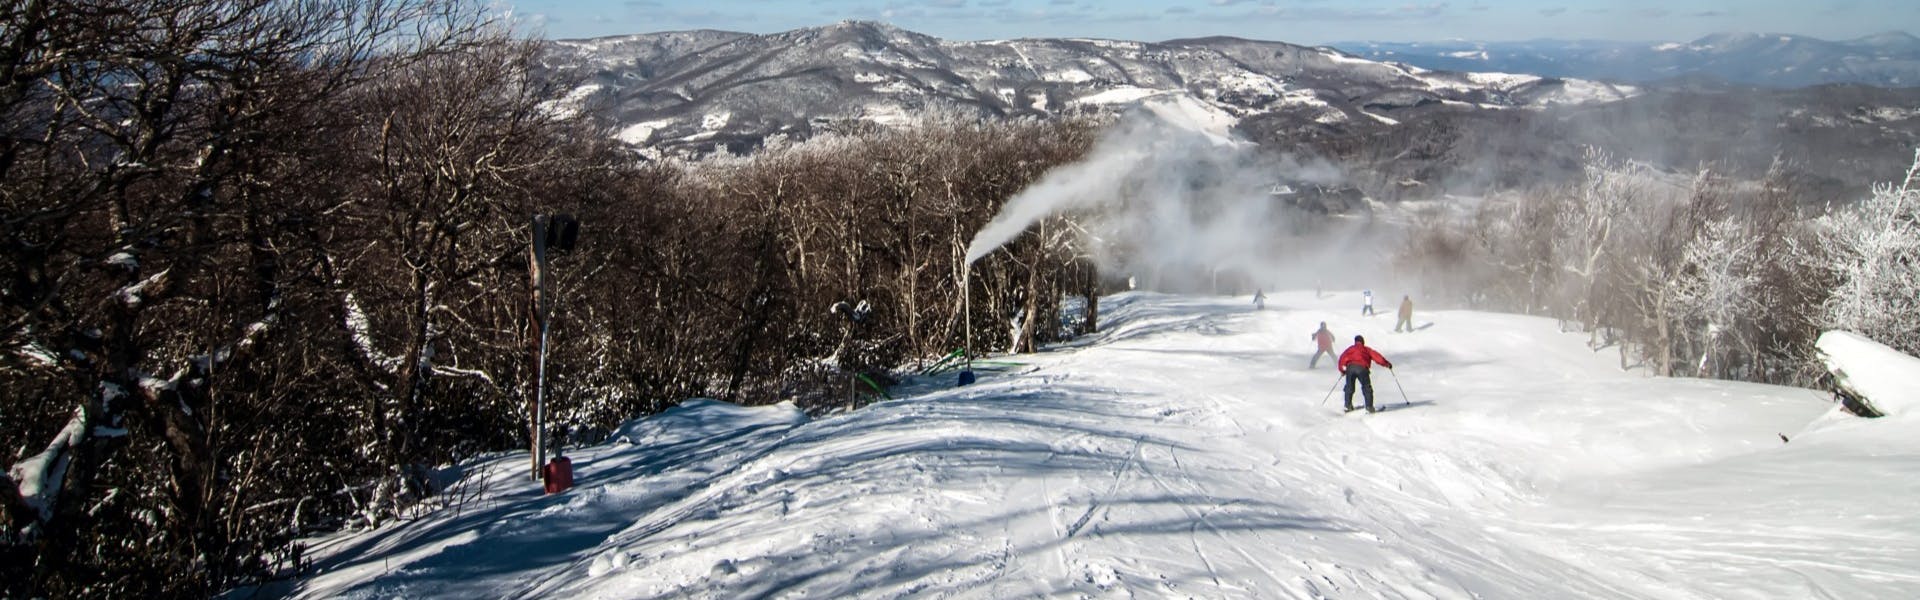 An Expert Guide to Ski & Snowboard Resorts in the Southeast